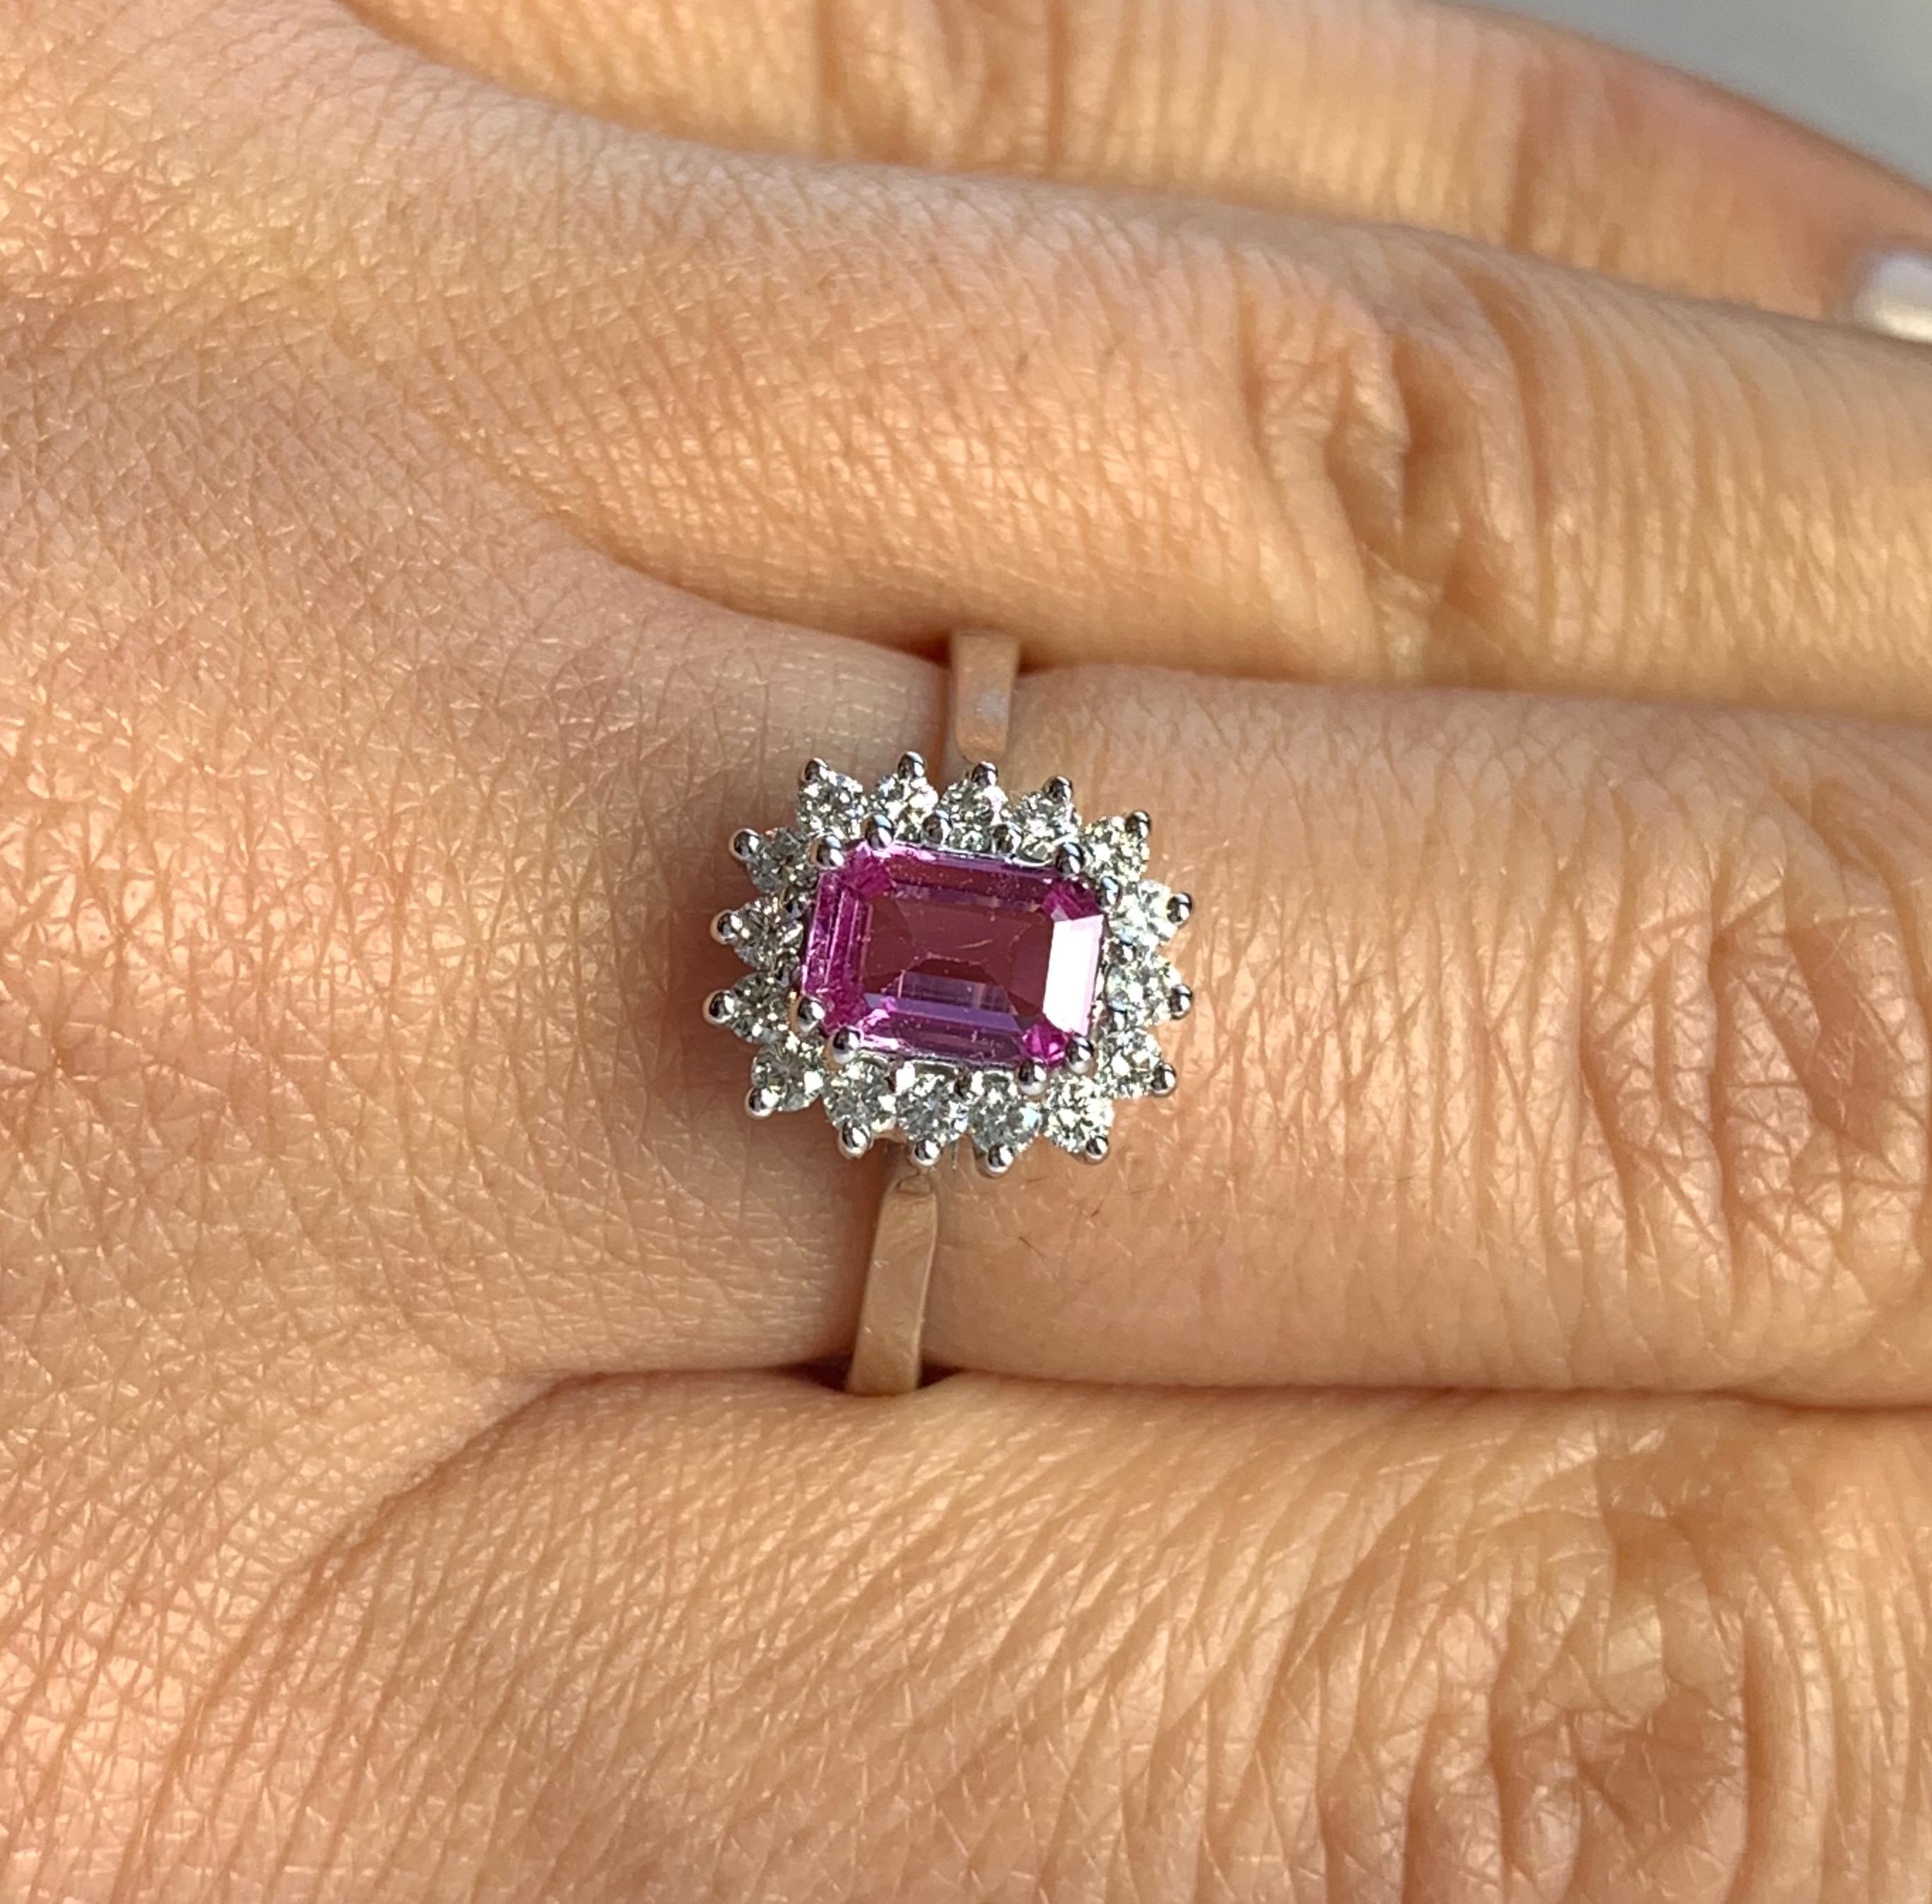 Material: 14k White Gold 
Center Stone Details: 0.63 Carat Emerald Cut Pink Sapphire 6 x 4 mm
Mounting Diamond Details: 16 Round White Diamonds Approximately 0.23 Carats - Clarity: SI / Color: H-I
Ring Size: Size 5.5. Alberto offers complimentary